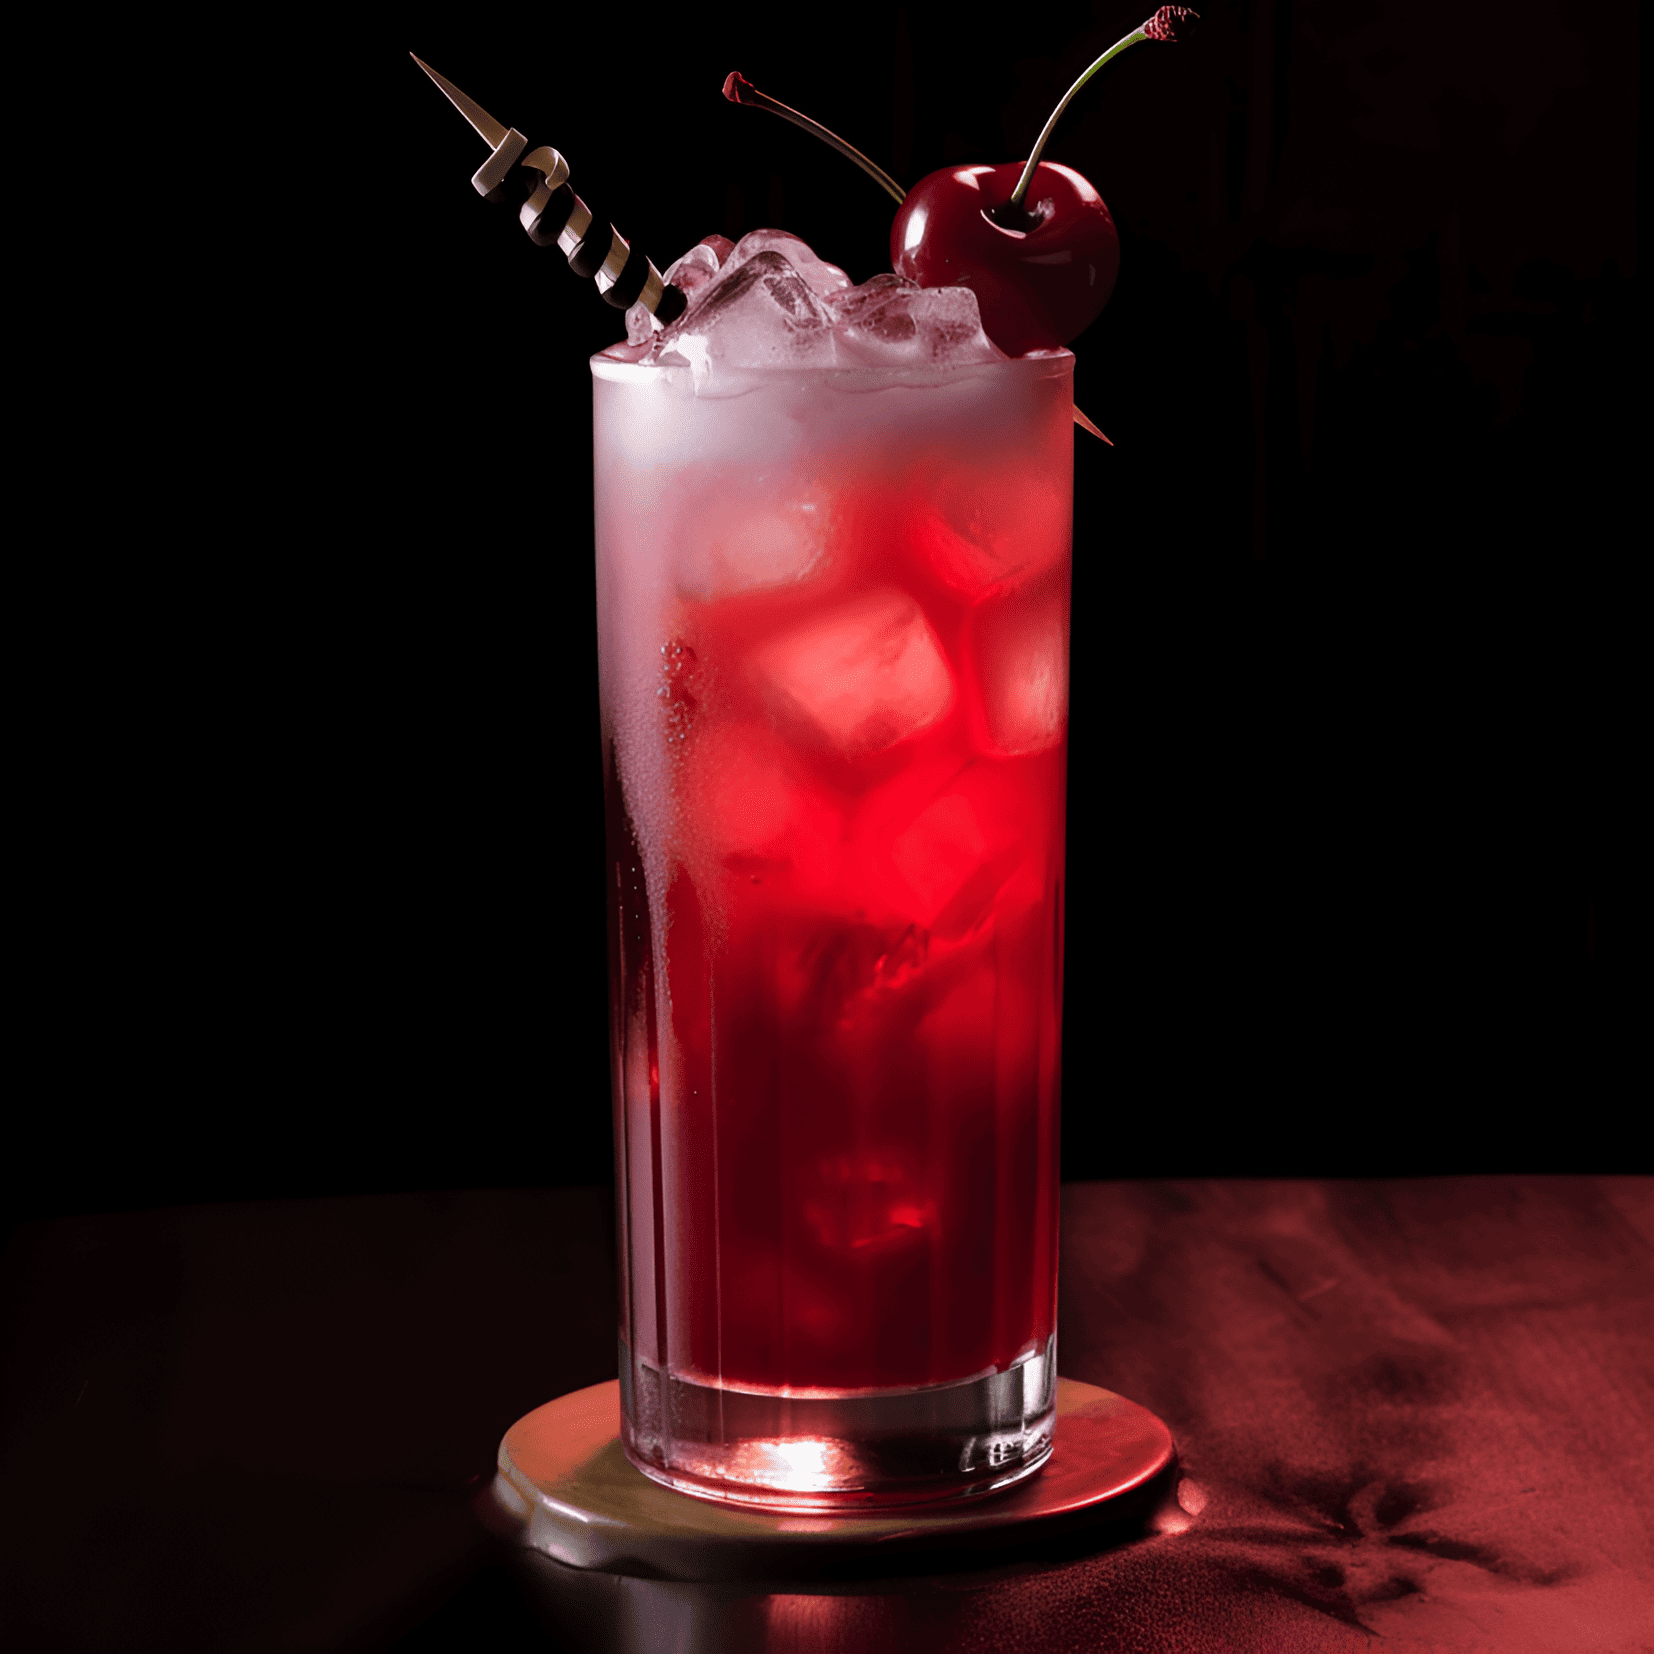 The Voodoo Child cocktail is a harmonious blend of sweet, sour, and fruity flavors. The tangy notes of lime and pineapple are balanced by the sweetness of grenadine and the richness of rum, creating a vibrant and refreshing taste. The cocktail is medium-bodied, with a smooth and velvety texture.